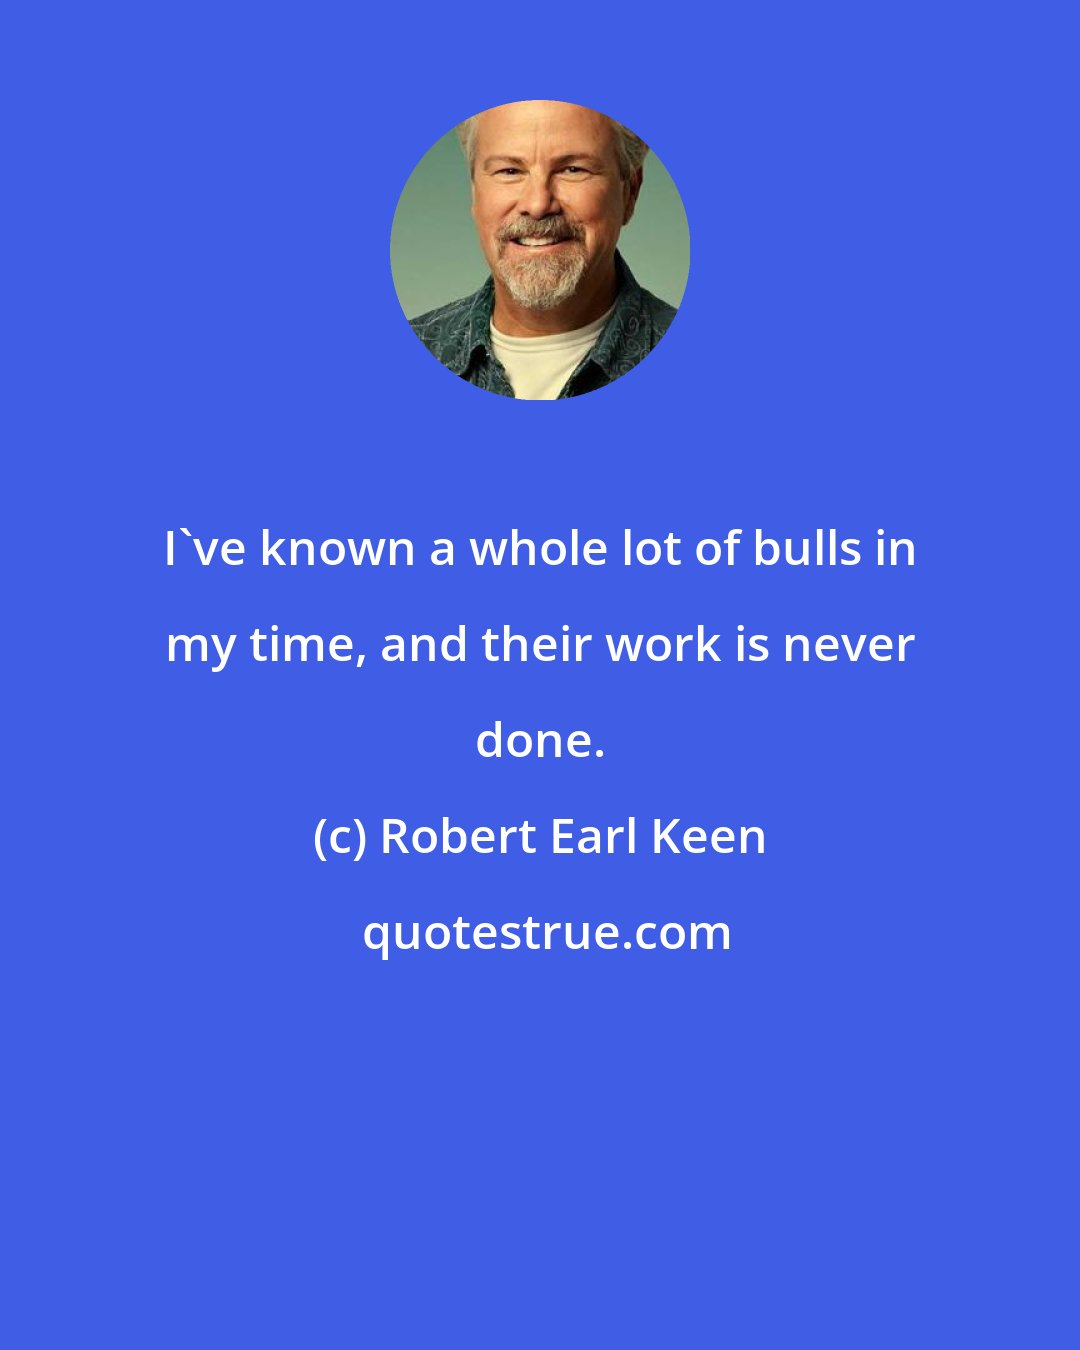 Robert Earl Keen: I've known a whole lot of bulls in my time, and their work is never done.